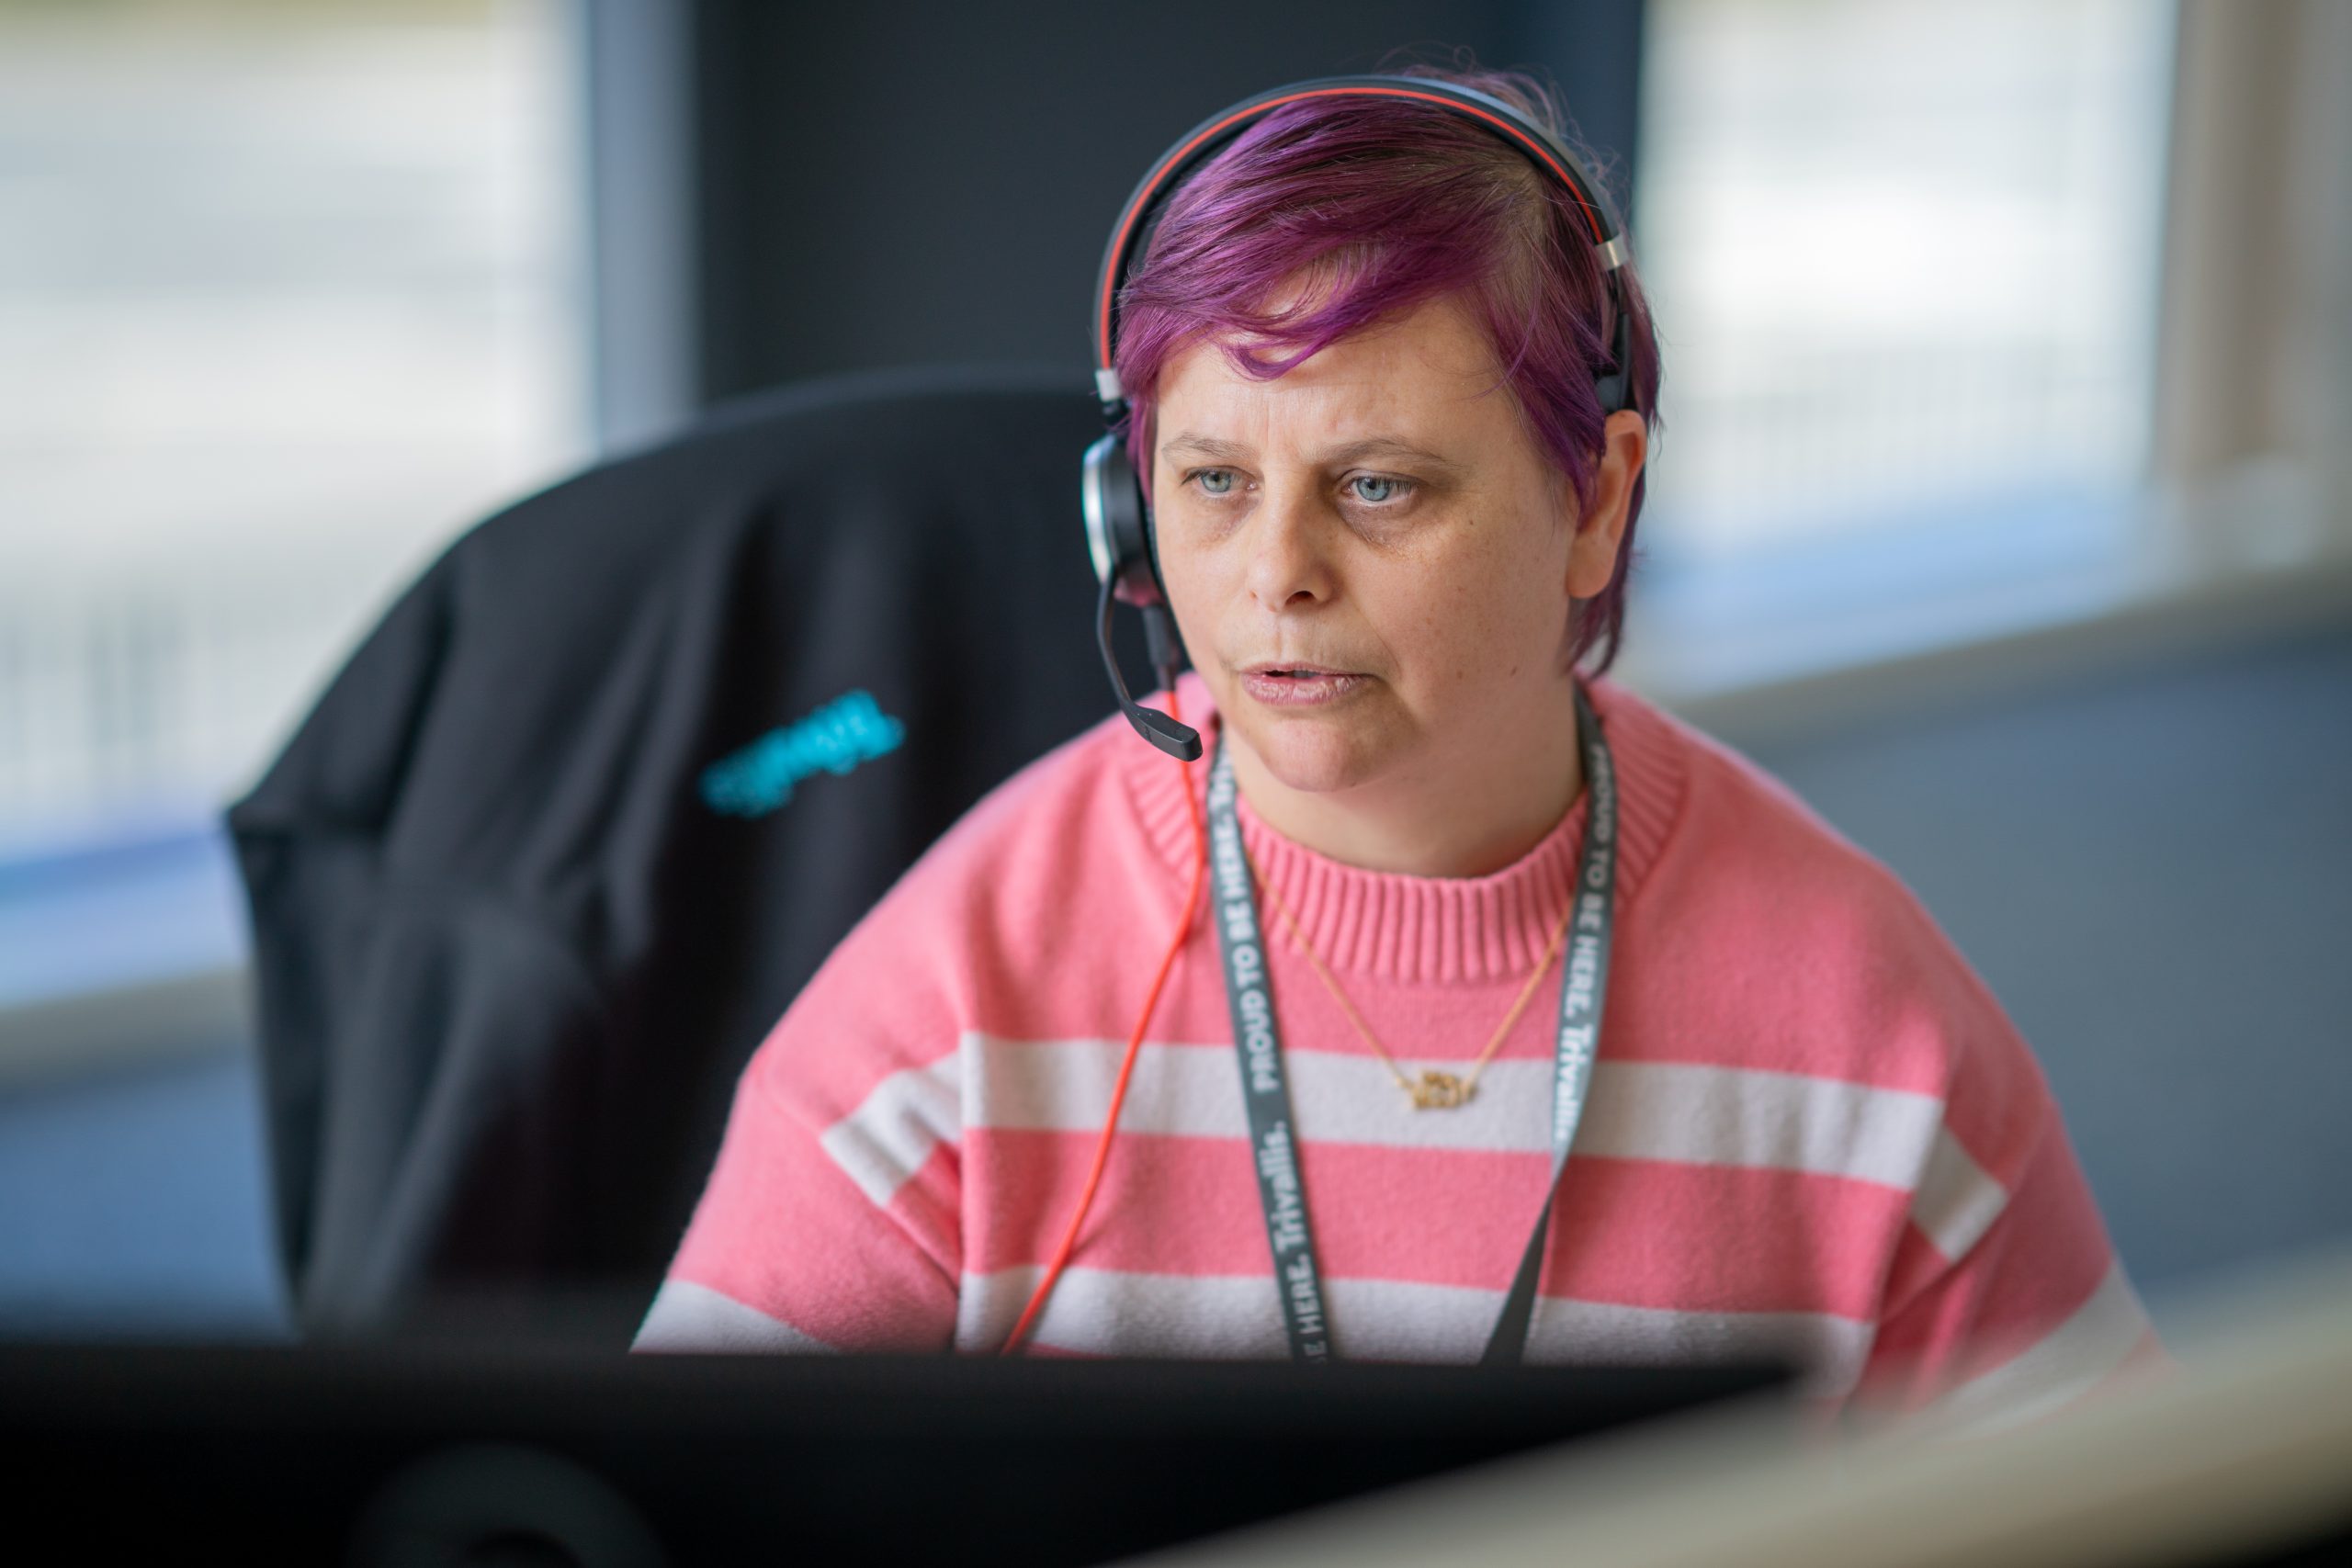 Trivallis Housing Landlord Wales A woman with purple hair wearing a headset sits in front of a computer monitor in an office setting. she is wearing a pink and white striped sweater and has a focused expression.